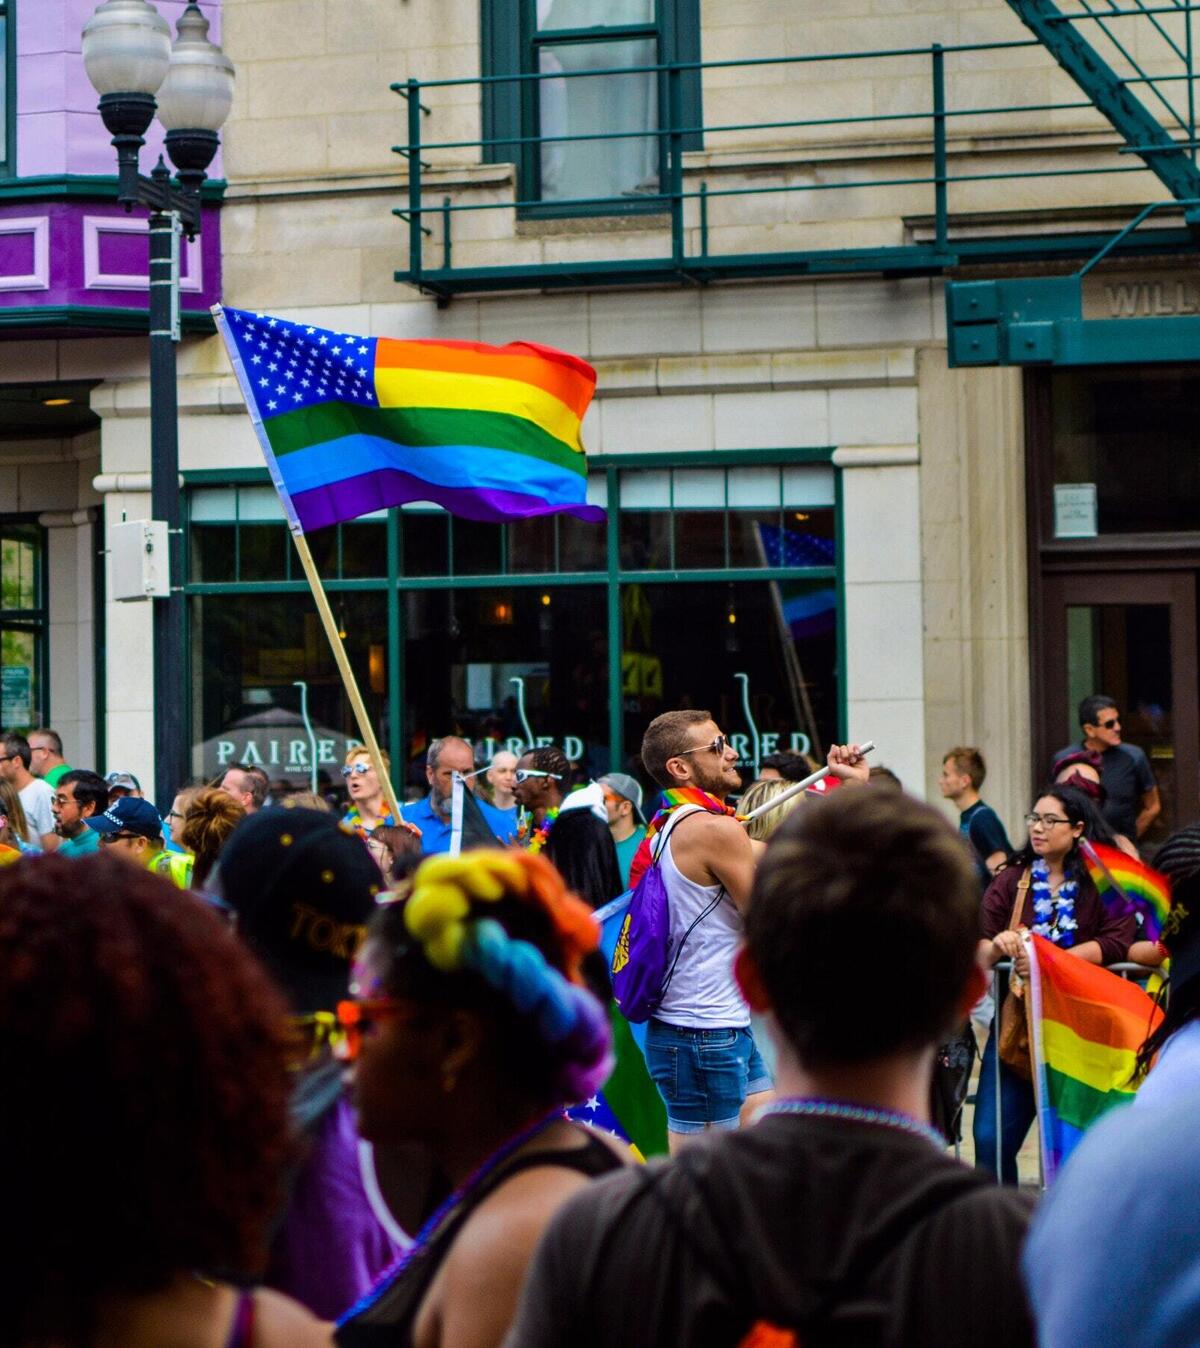 LGBT+ pride parade, man walking with a flag surrounded by a crowd of cheering supporters